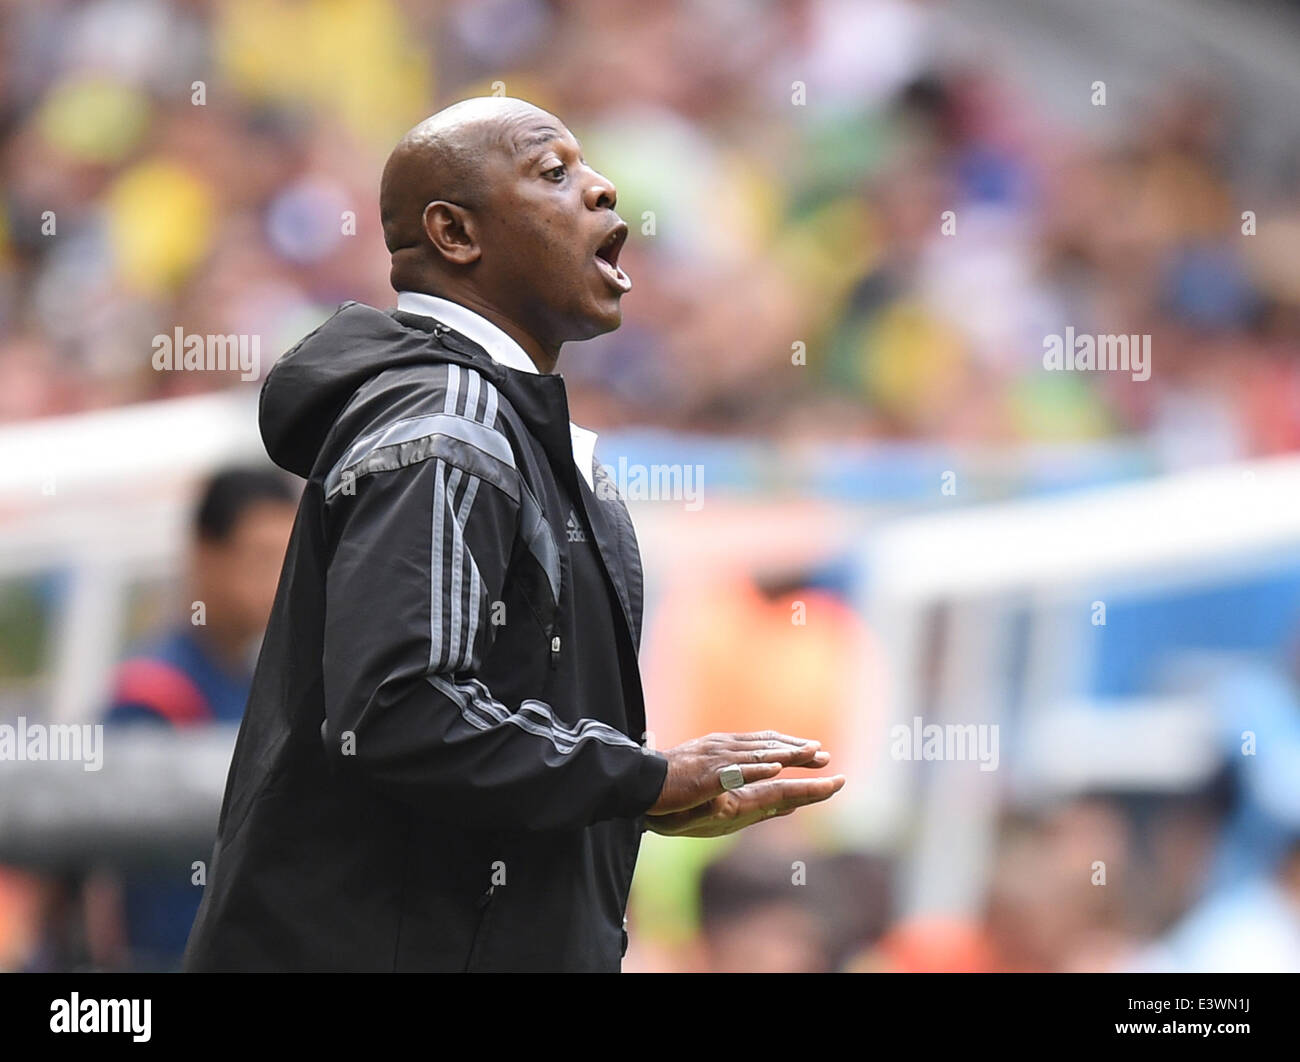 Brasilia, Brazil. 30th June, 2014. Head coach Stephen Keshi of Nigeria reacts during the FIFA World Cup 2014 round of 16 match between France and Nigeria at the Estadio National Stadium in Brasilia, Brazil, on 30 June 2014. Credit:  dpa picture alliance/Alamy Live News Stock Photo